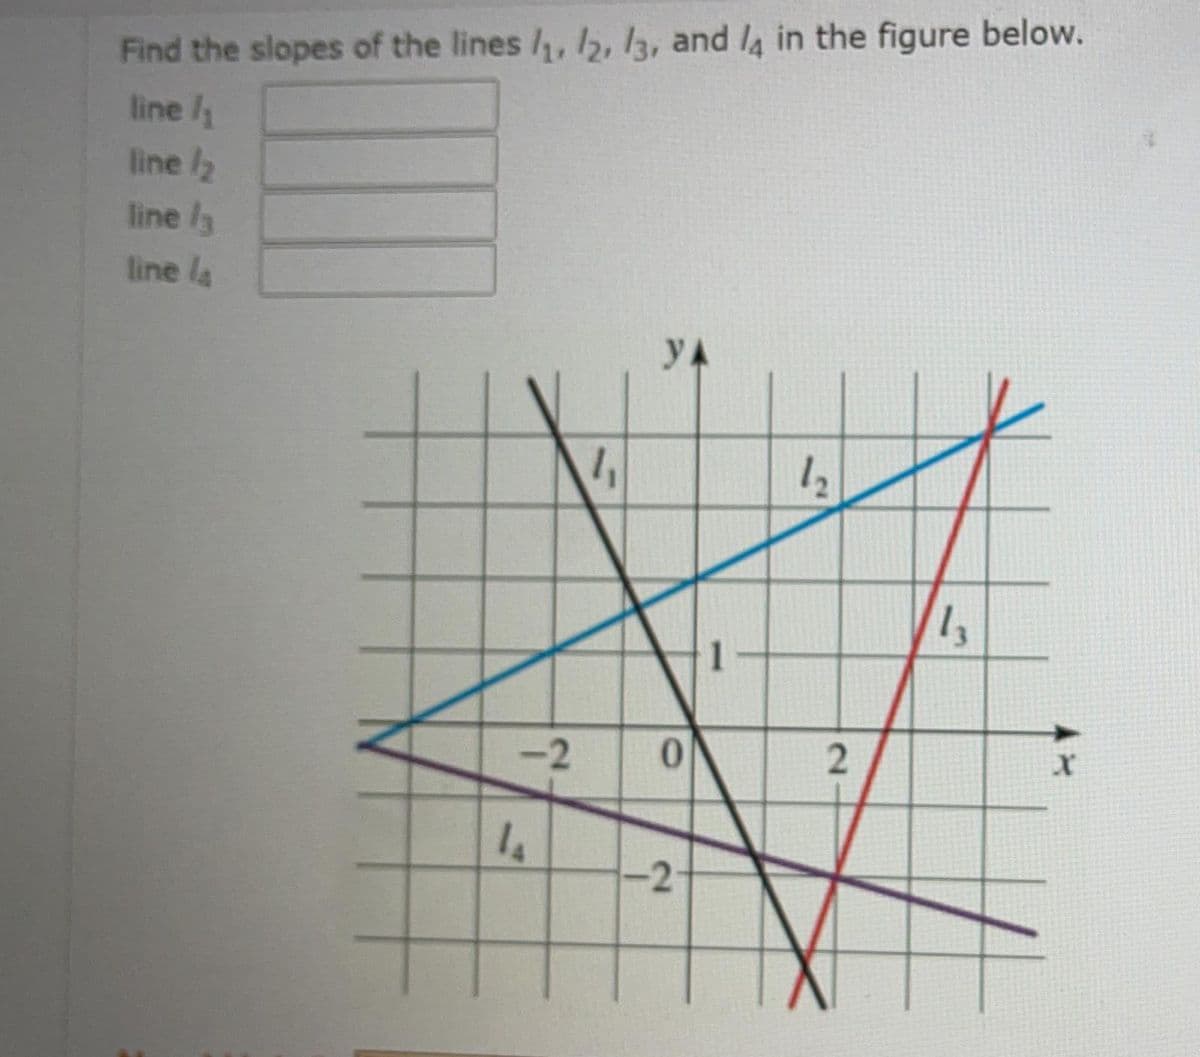 Find the slopes of the lines /, 2, 13, and la in the figure below.
line /
line /2
line /3
line la
yA
12
-2
0.
14
-2
2)
